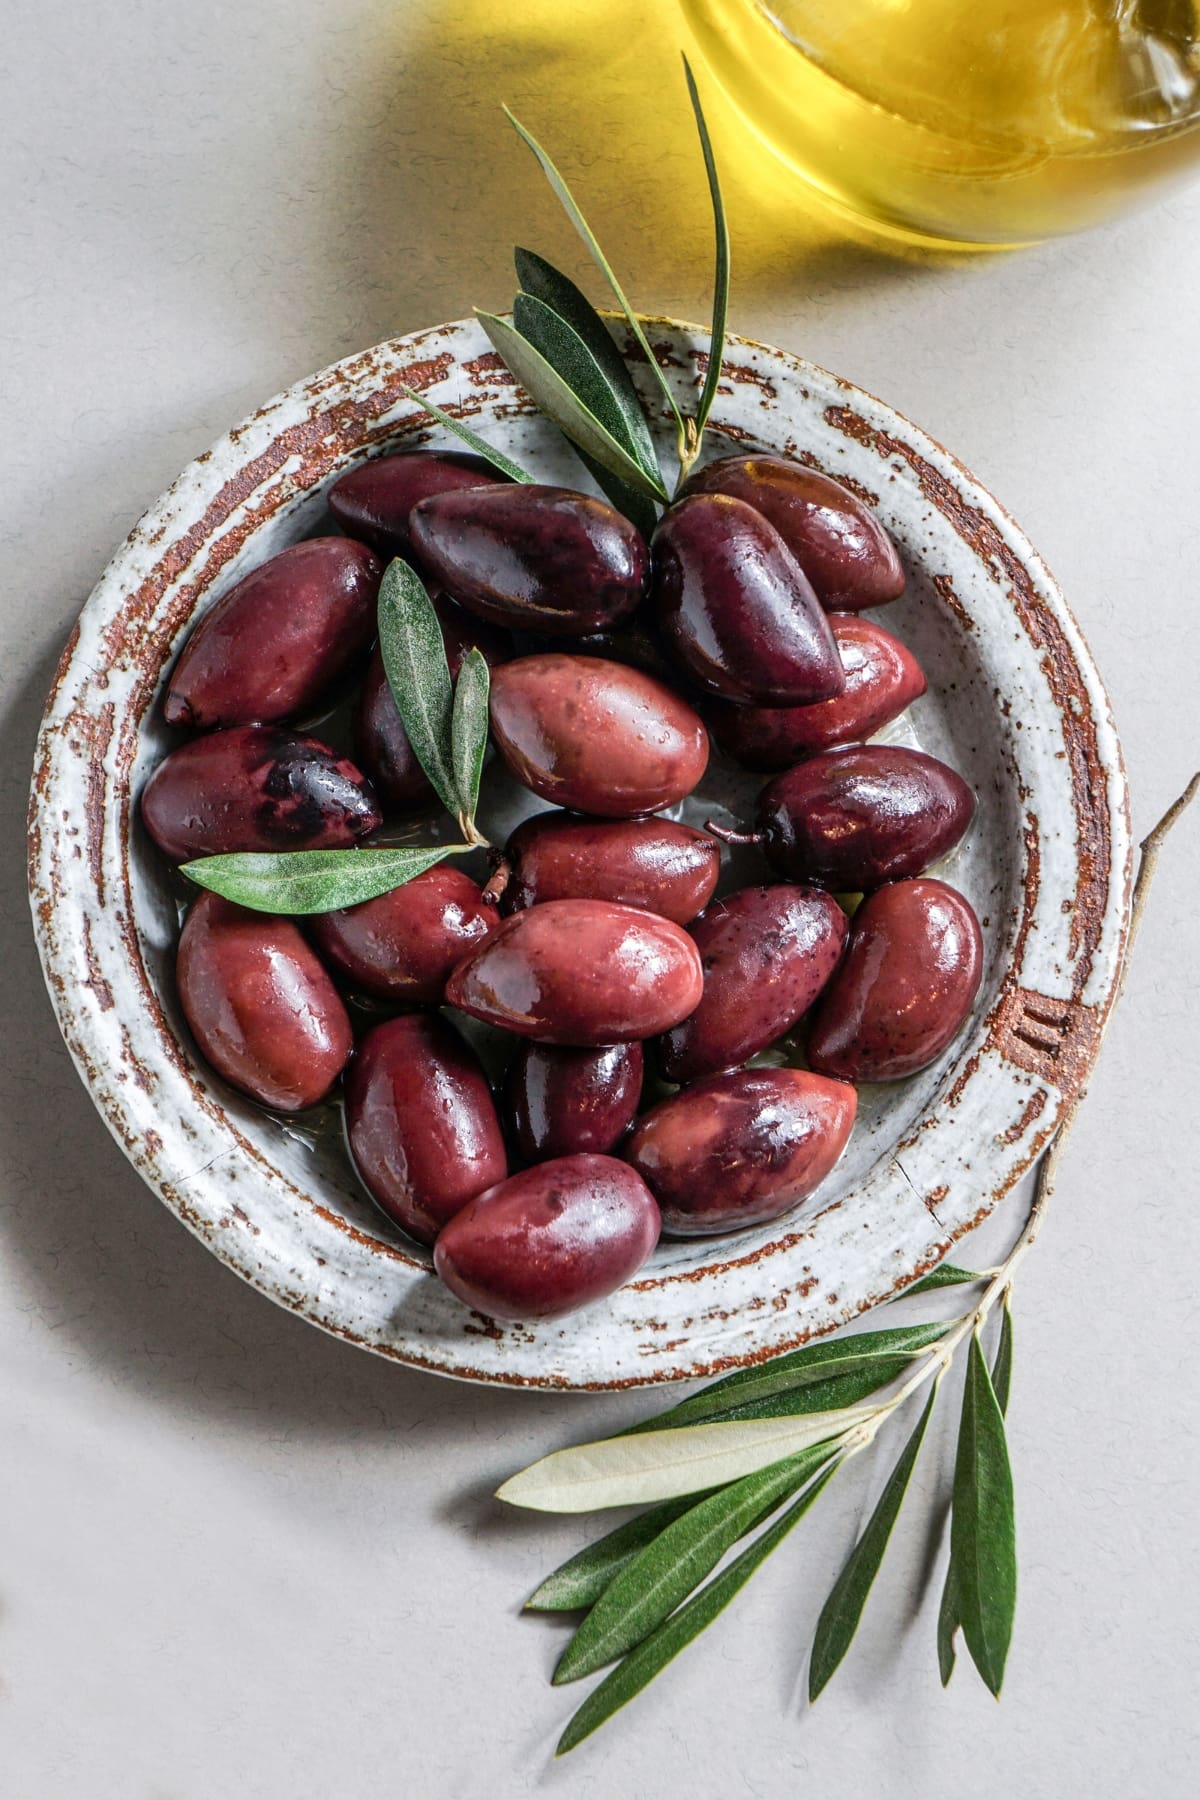 Kalamata Olives in a White Plate